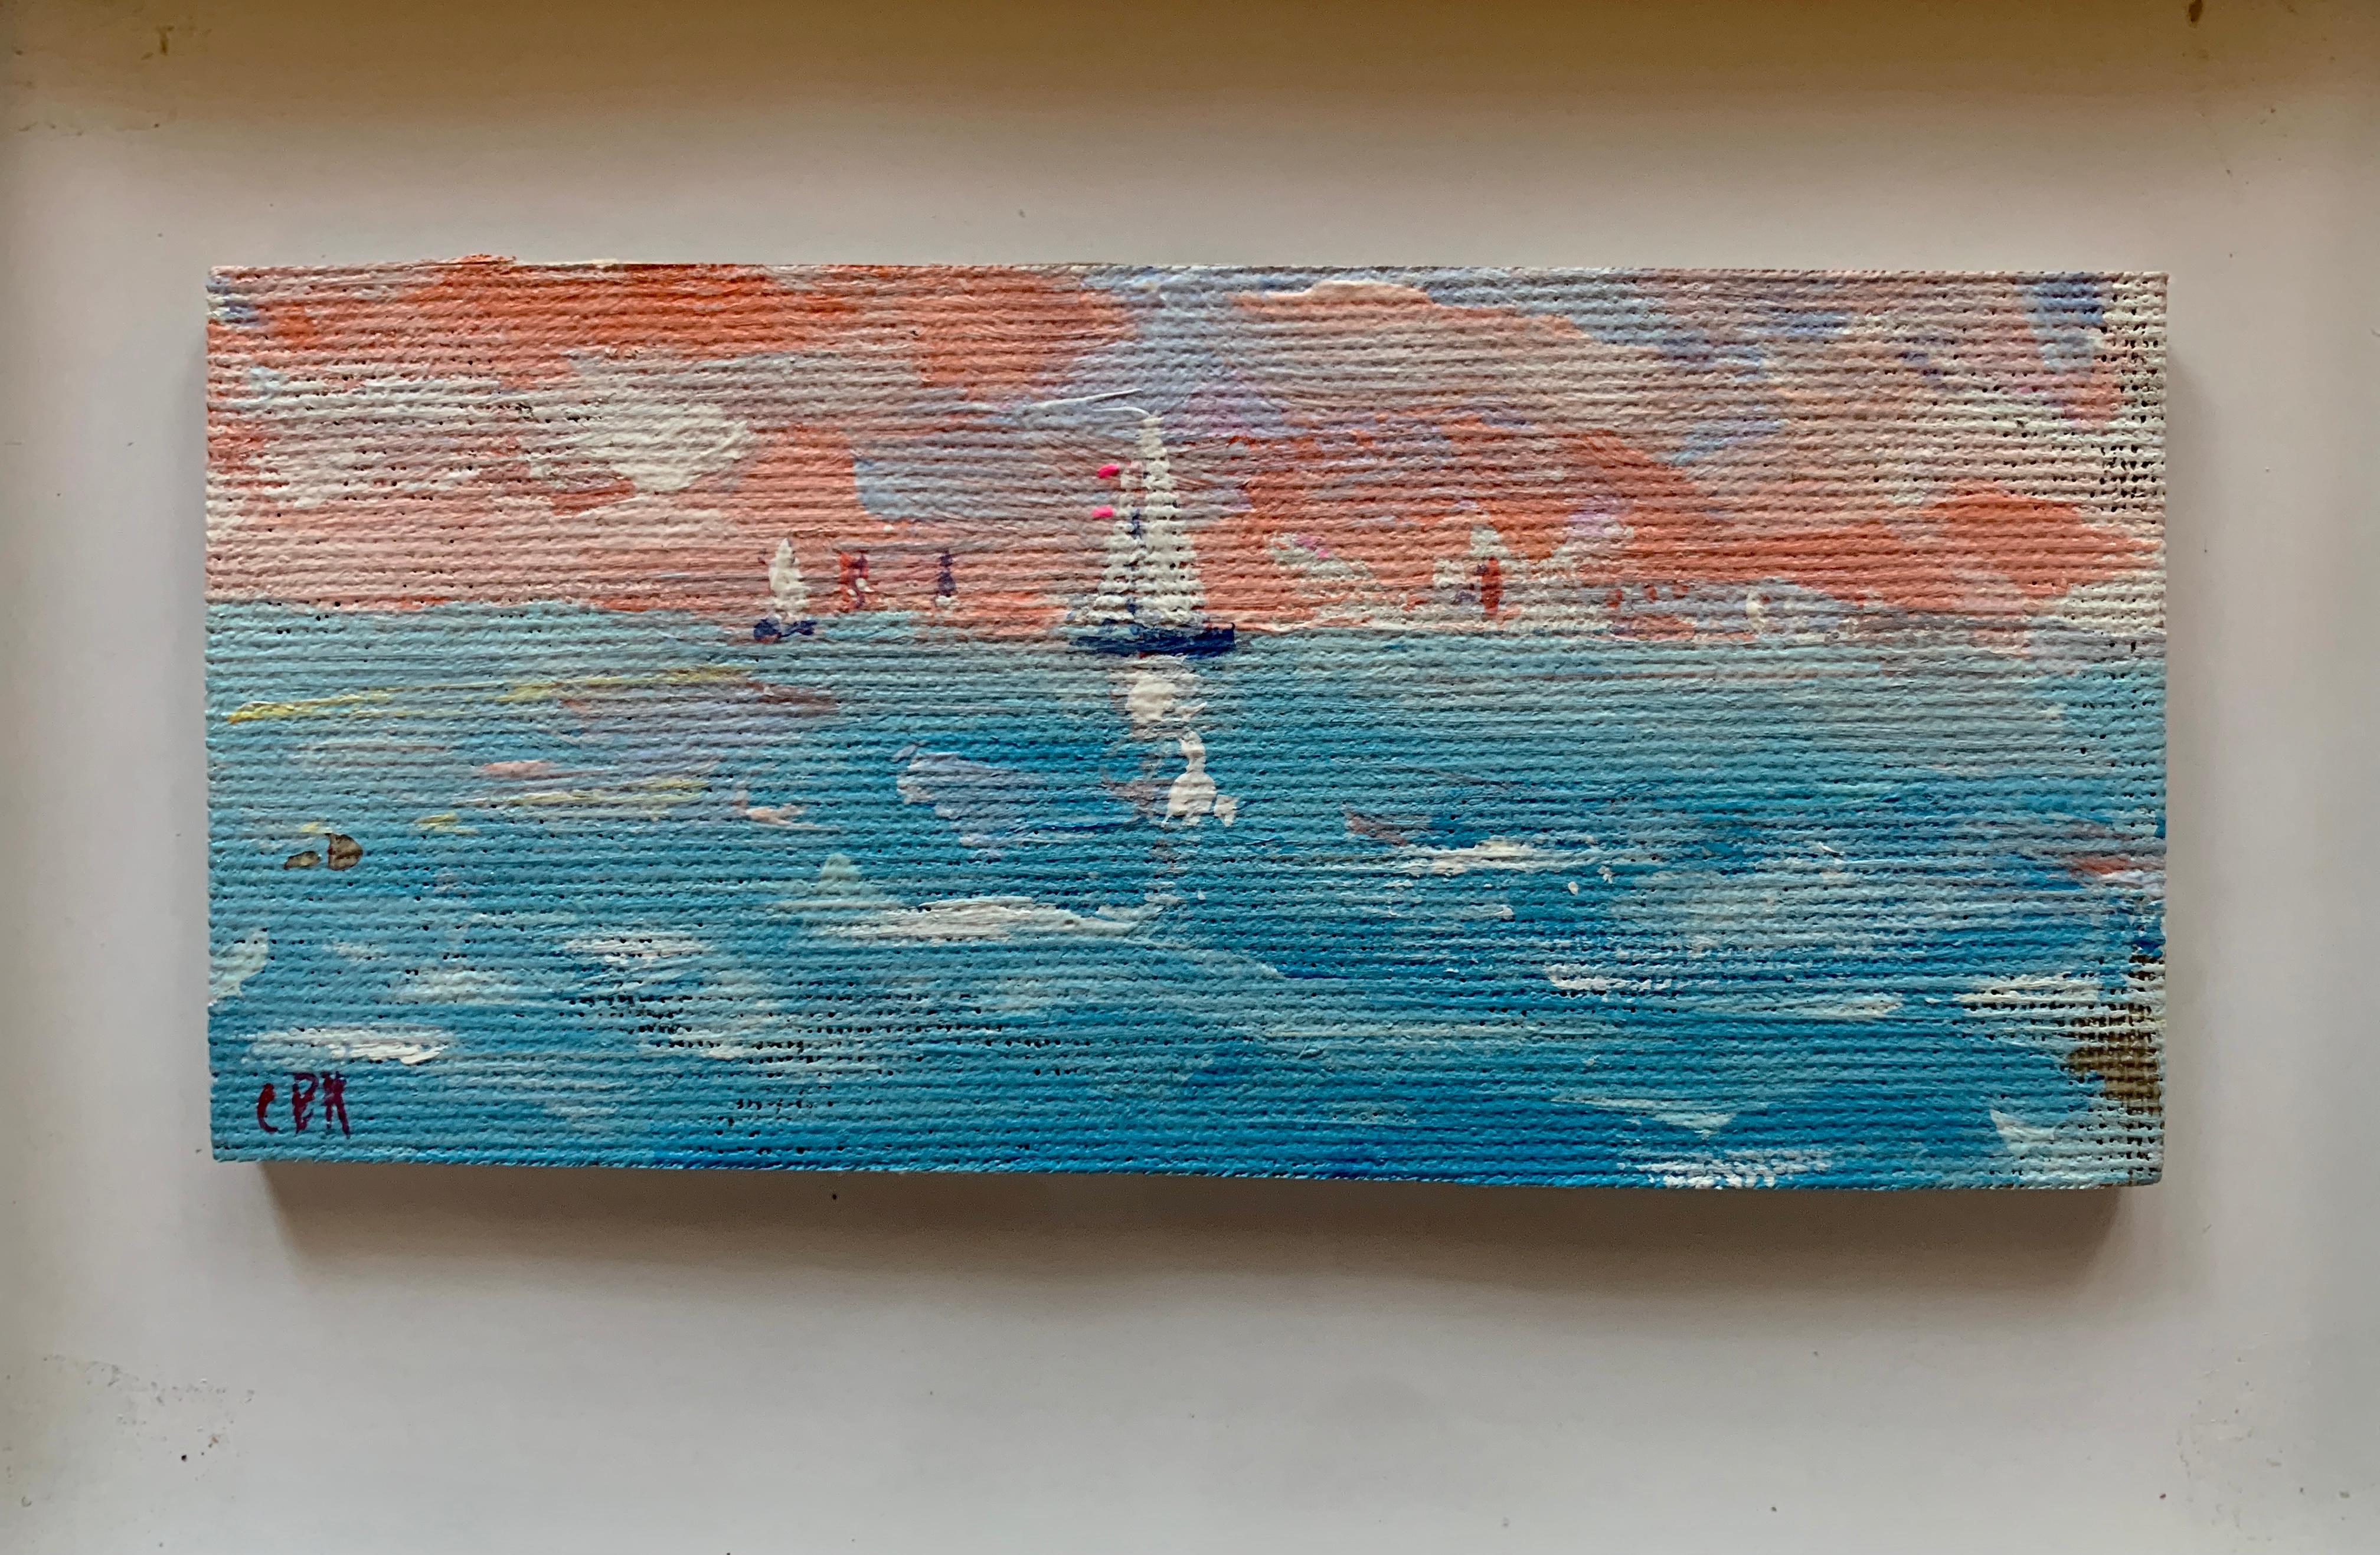 Impressionist oil sketch of yachts off the coast of Nantucket with a Setting Sun - Painting by Charles Bertie Hall